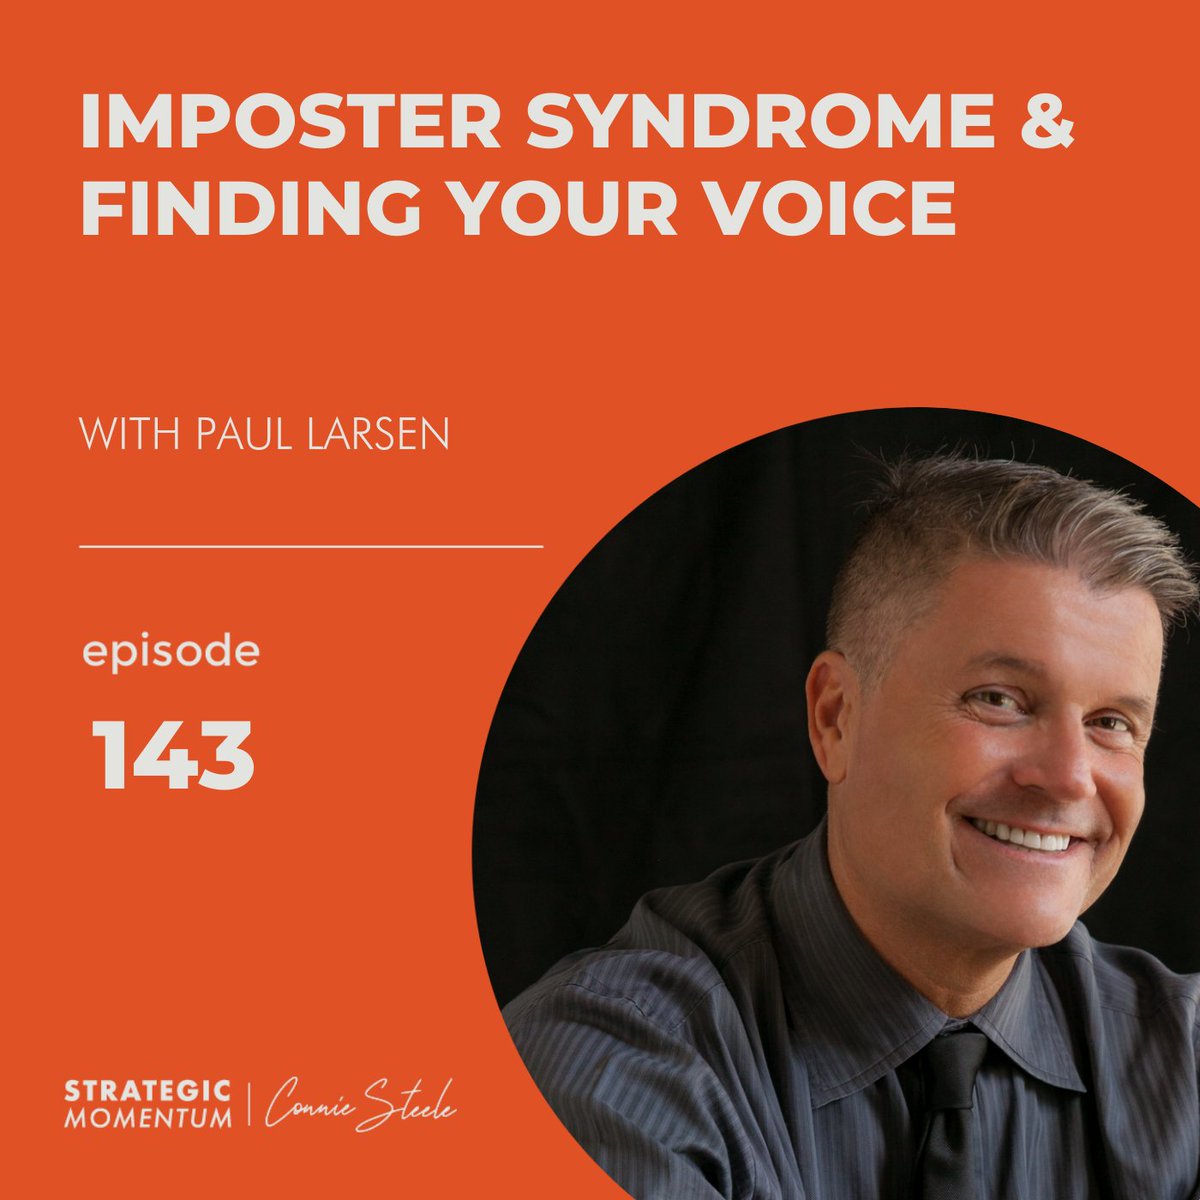 Ever felt imposter syndrome? You're not alone! Up to 90% of successful pros have too. 🤯 Listen to @VoiceasaLeader Paul Larsen to understand its root causes and how to overcome it. bit.ly/paullarsen. #impostersyndrome #podcast #growthmind